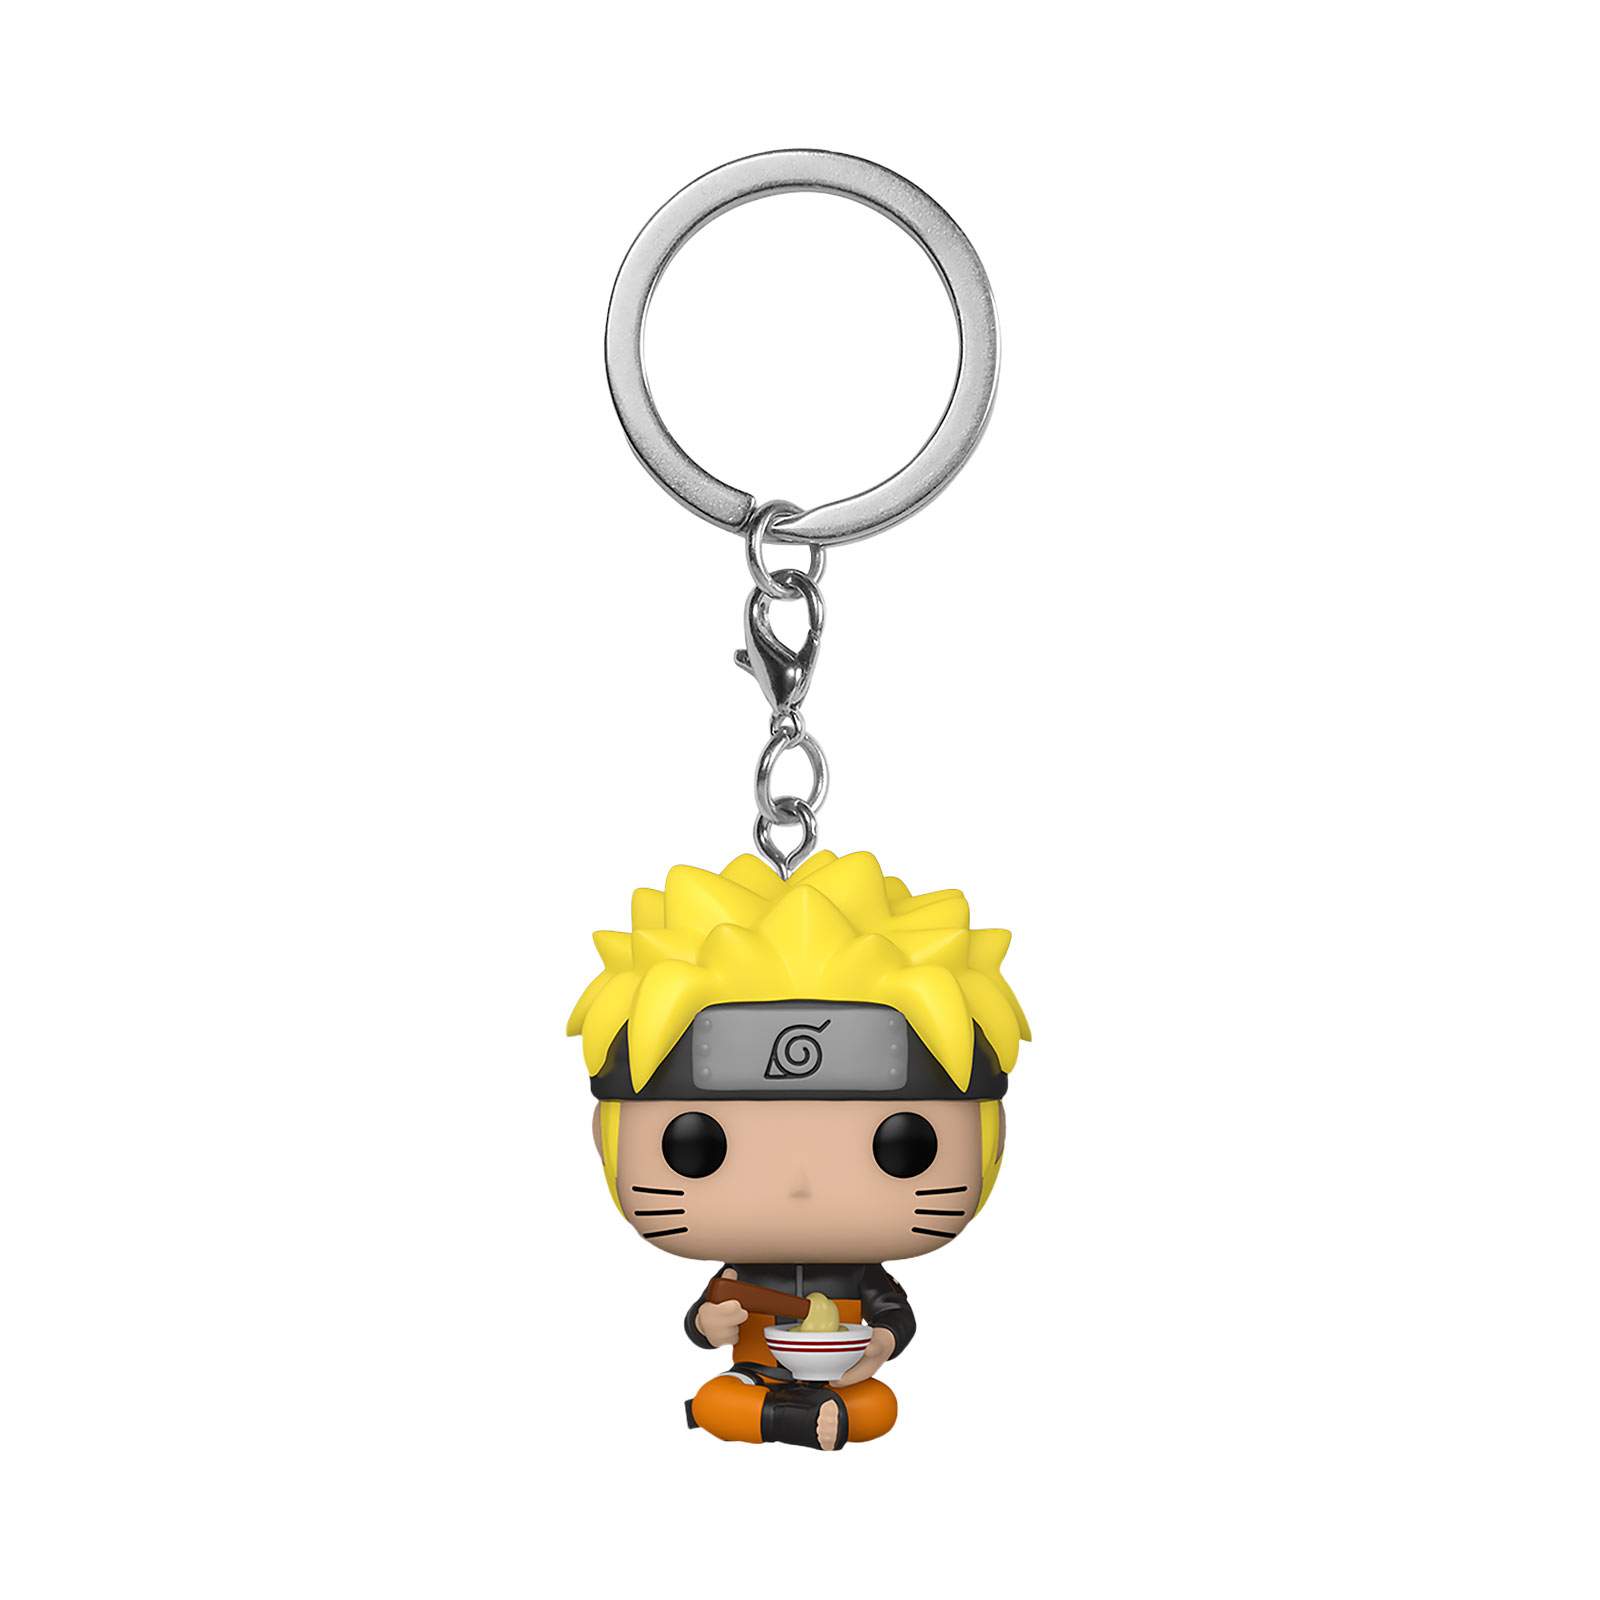 Naruto Shippuden with Noodles Funko Pop Keychain